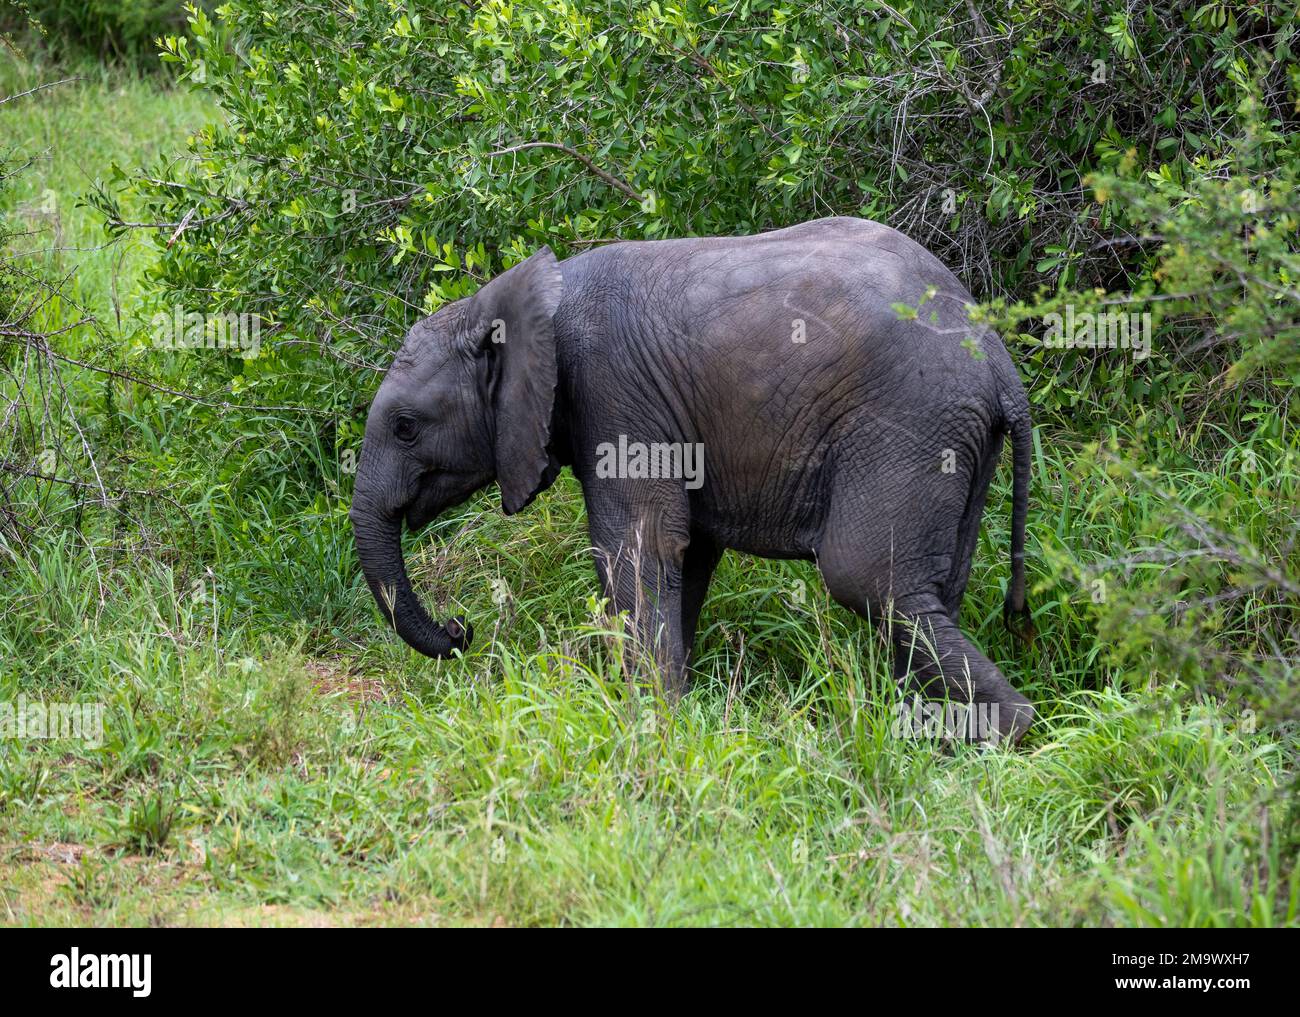 An baby African elephant (Loxodonta africana) walking in the bush. Kruger National Park, South Africa. Stock Photo